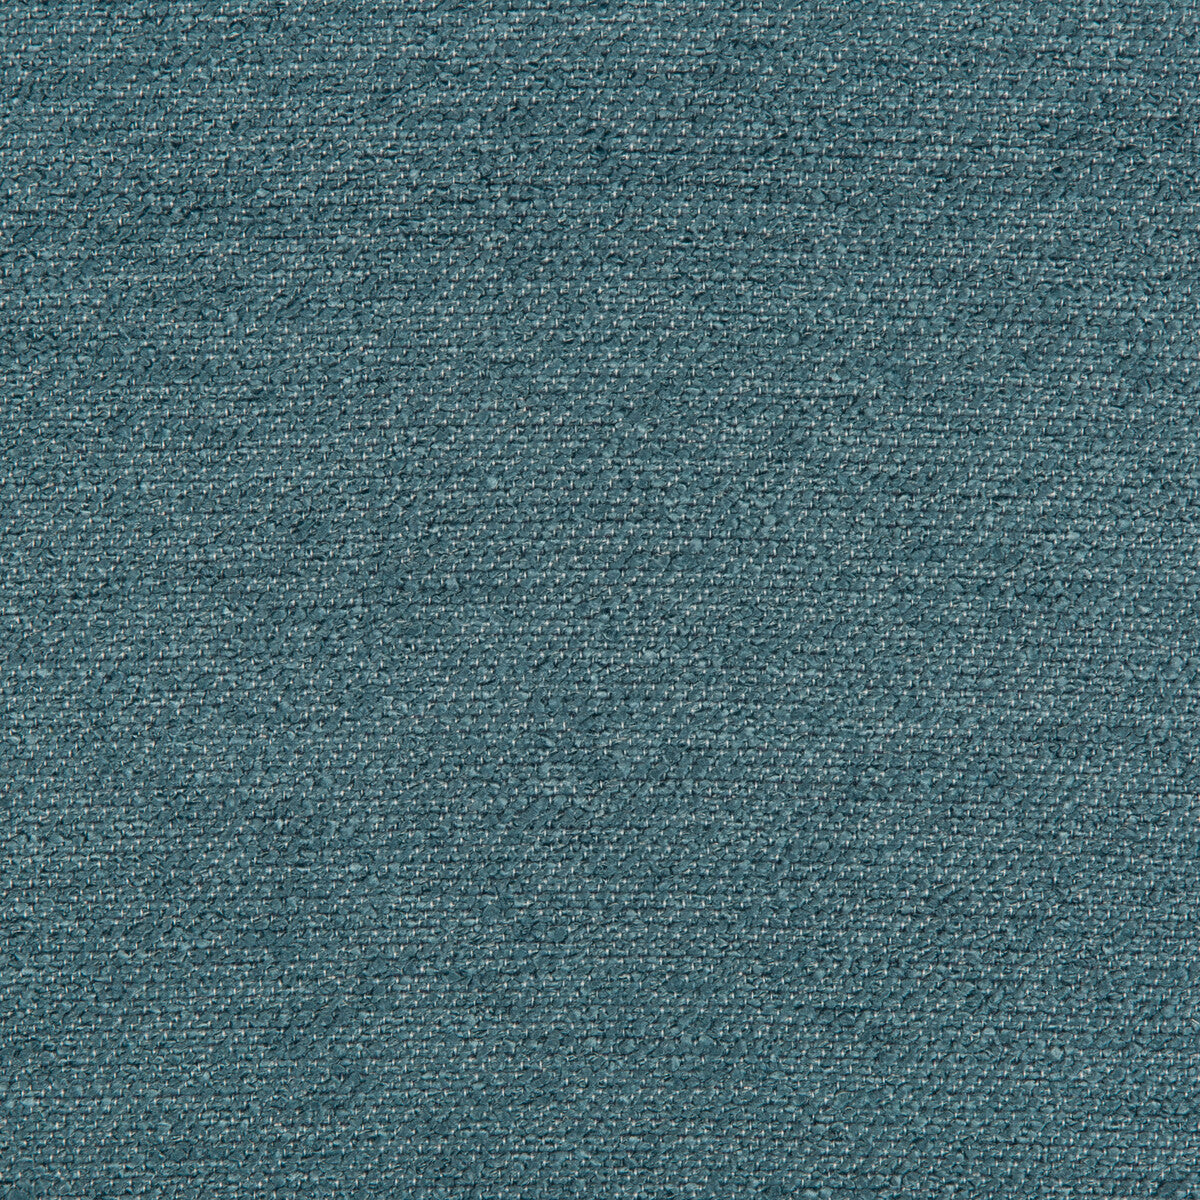 Kravet Contract fabric in 35142-53 color - pattern 35142.53.0 - by Kravet Contract in the Incase Crypton Gis collection